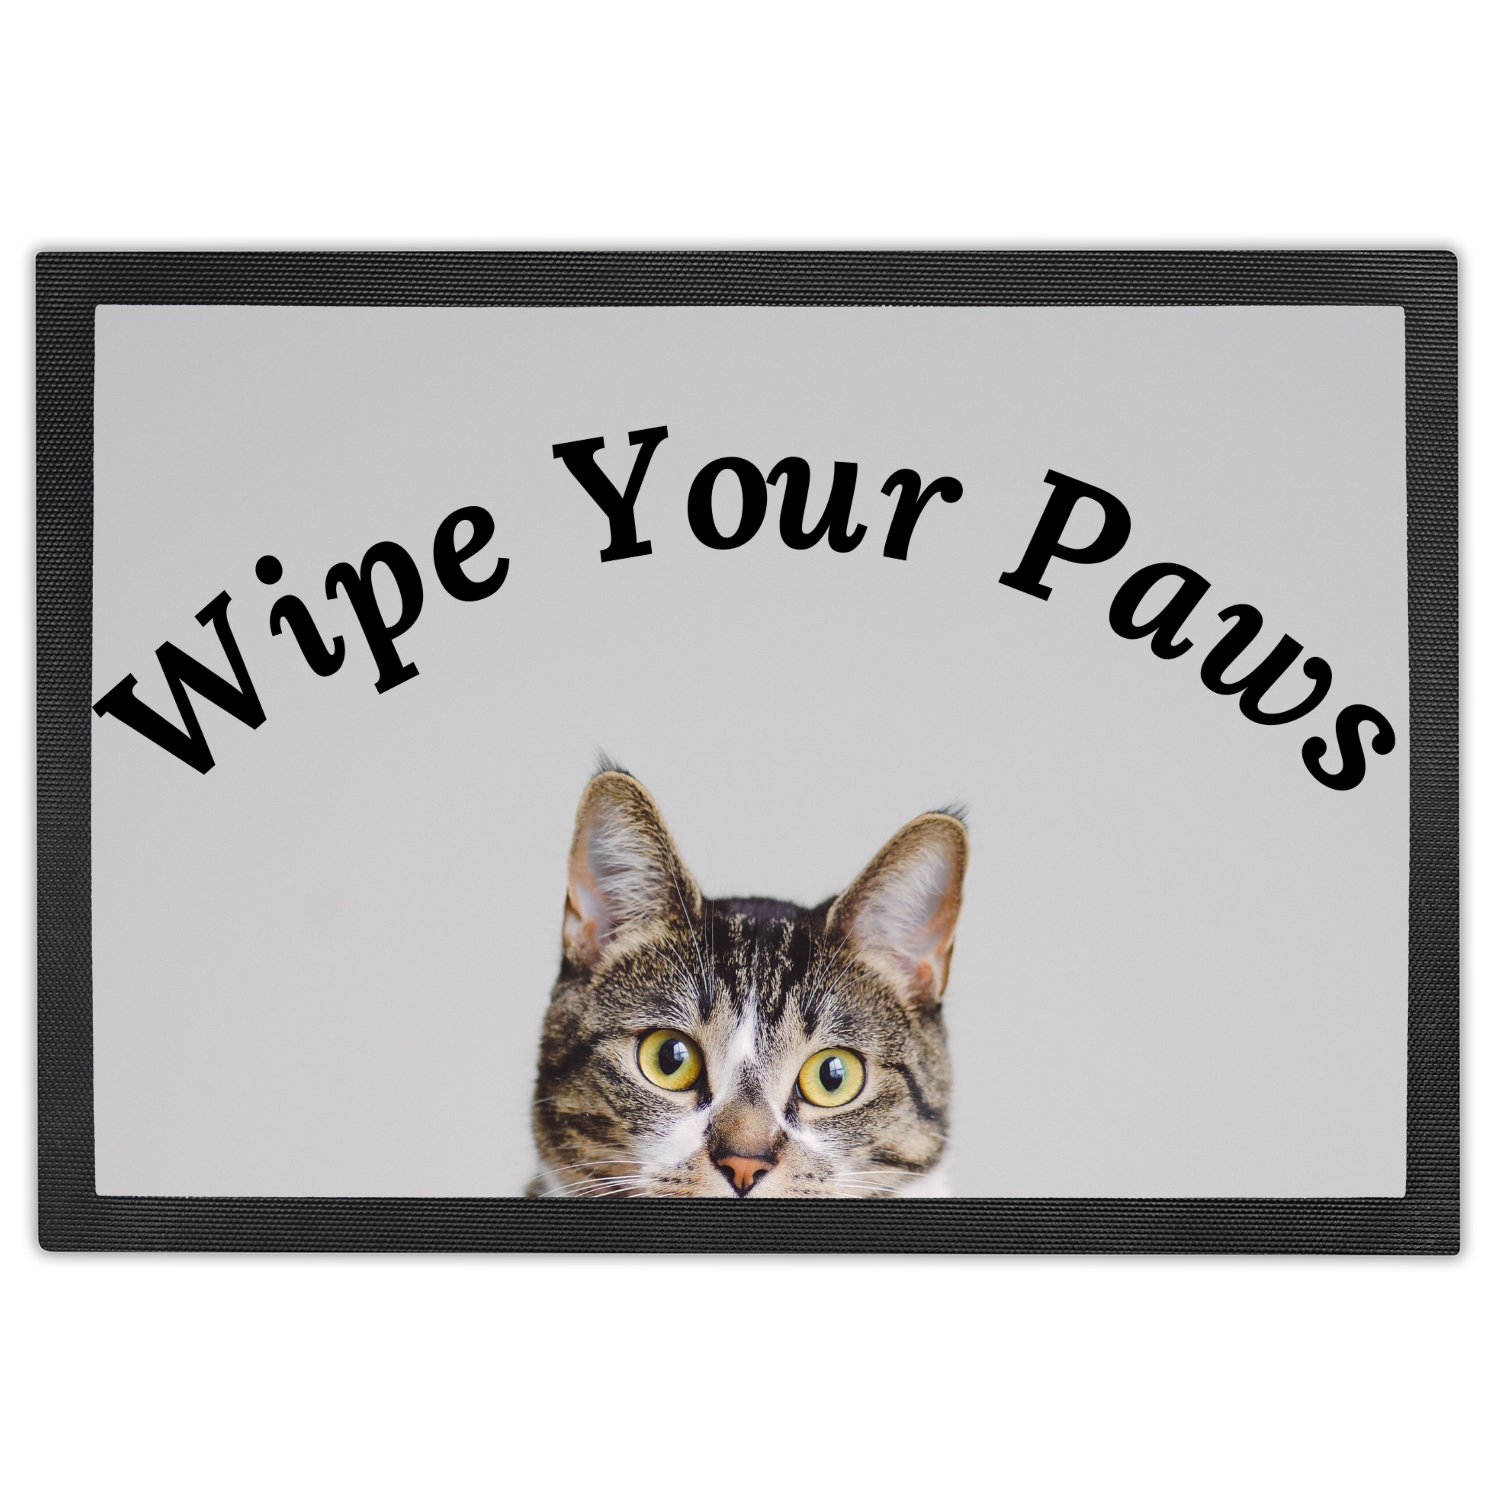 Wipe Your Paws Doormat Gray Striped Tabby Cat